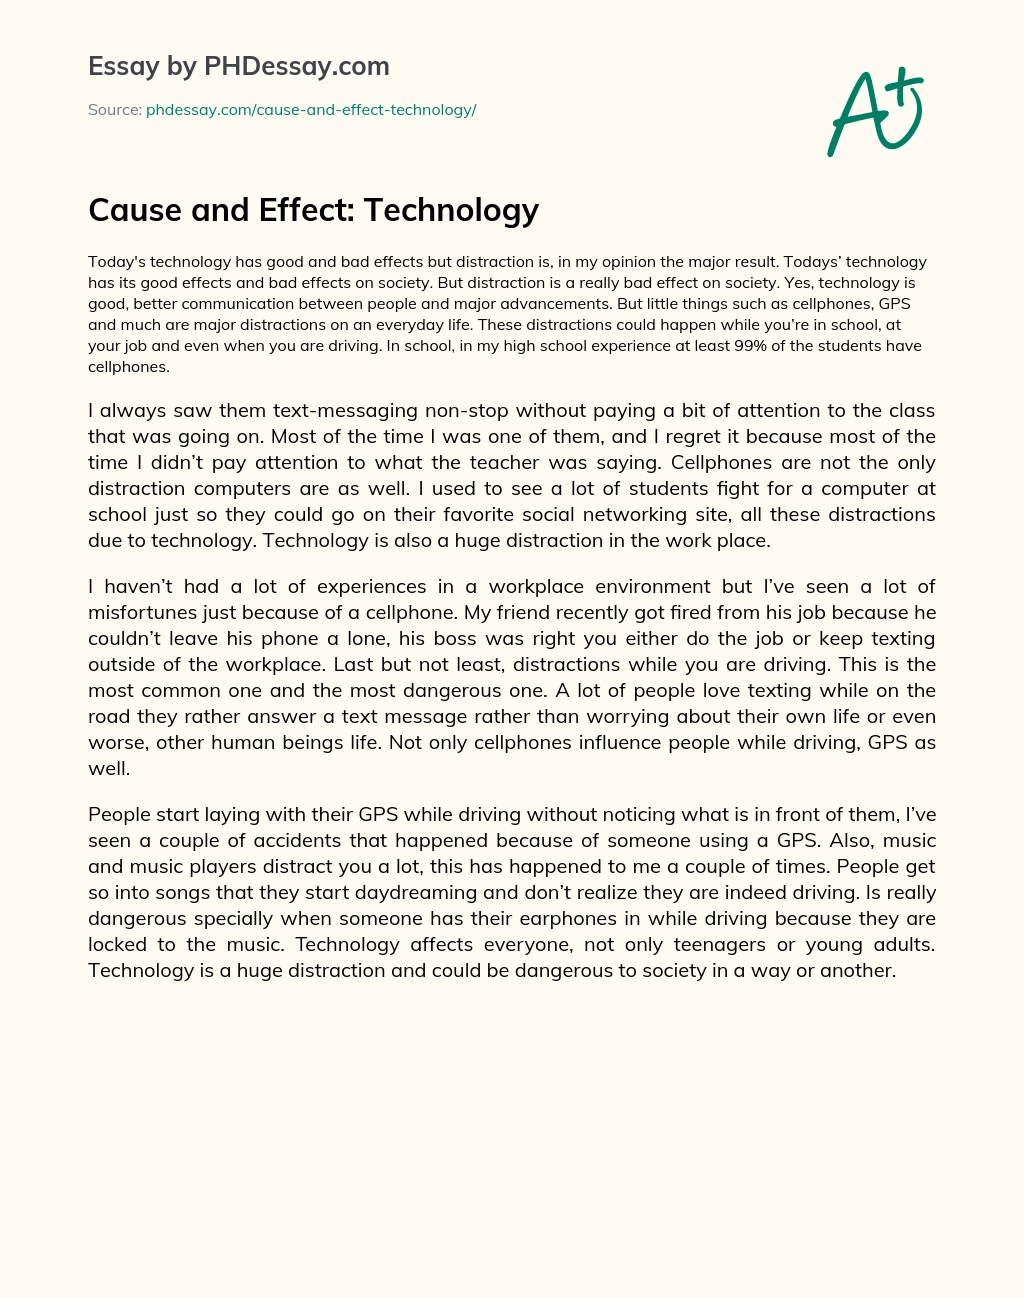 Cause and Effect: Technology essay